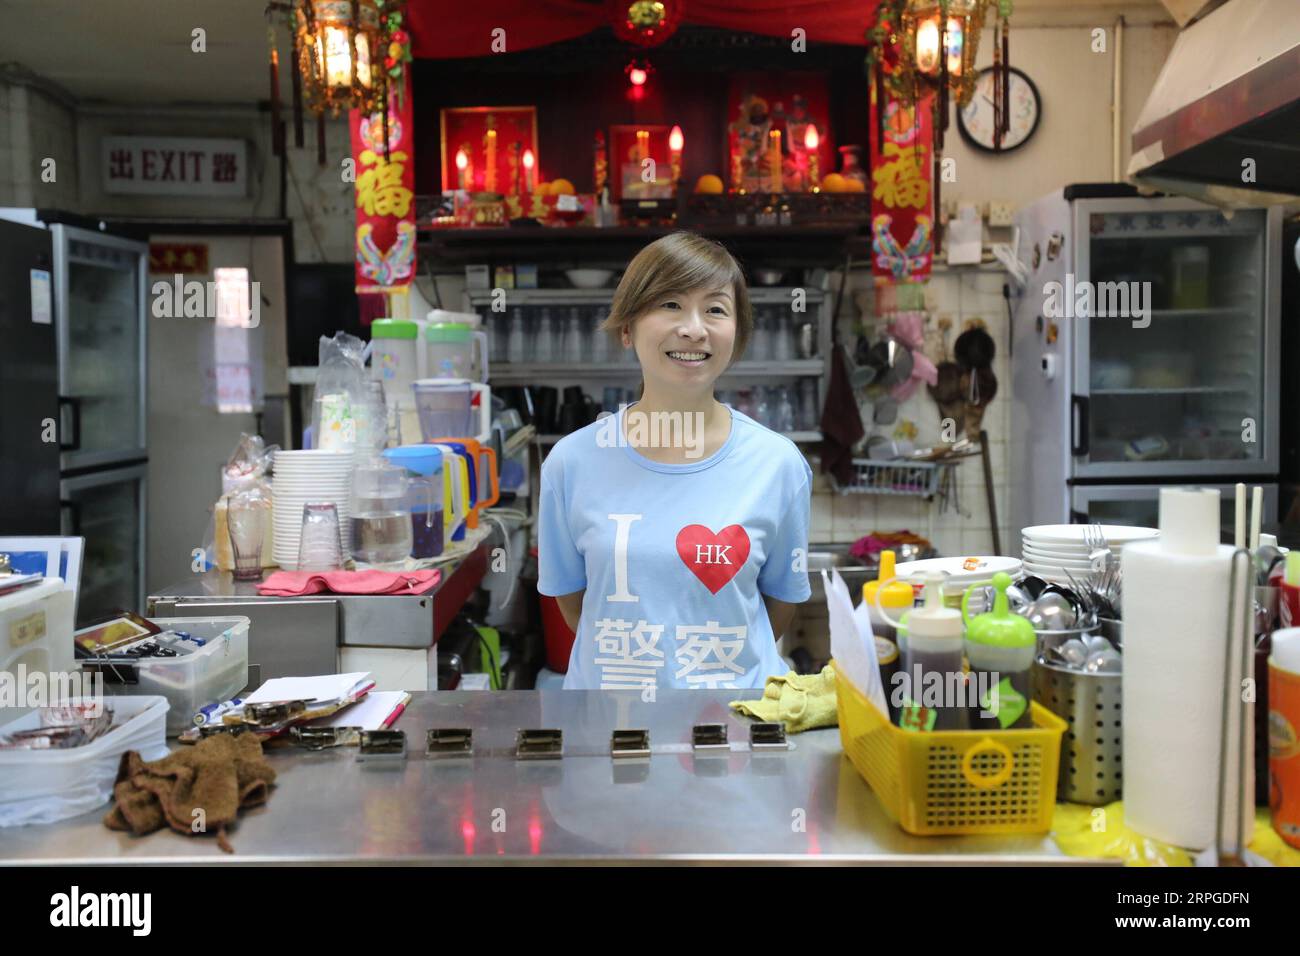 191012 -- HONG KONG, Oct. 12, 2019 -- Kate Lee, wearing a T-shirt with the I love HK police slogan on it, waits for customers at her tea restaurant in Kowloon, south China s Hong Kong, Oct. 10, 2019. Nestling in the labyrinthine seafood market of the quiet Lei Yue Mun fishing village in Hong Kong, a snug little tea restaurant has unexpectedly become a beacon of courage for ordinary Hong Kong people seeking peace amid the recent chaos. After she posted pictures backing up Hong Kong police against some radical protesters at the end of June, Kate Lee, the owner of the tea restaurant, found her co Stock Photo